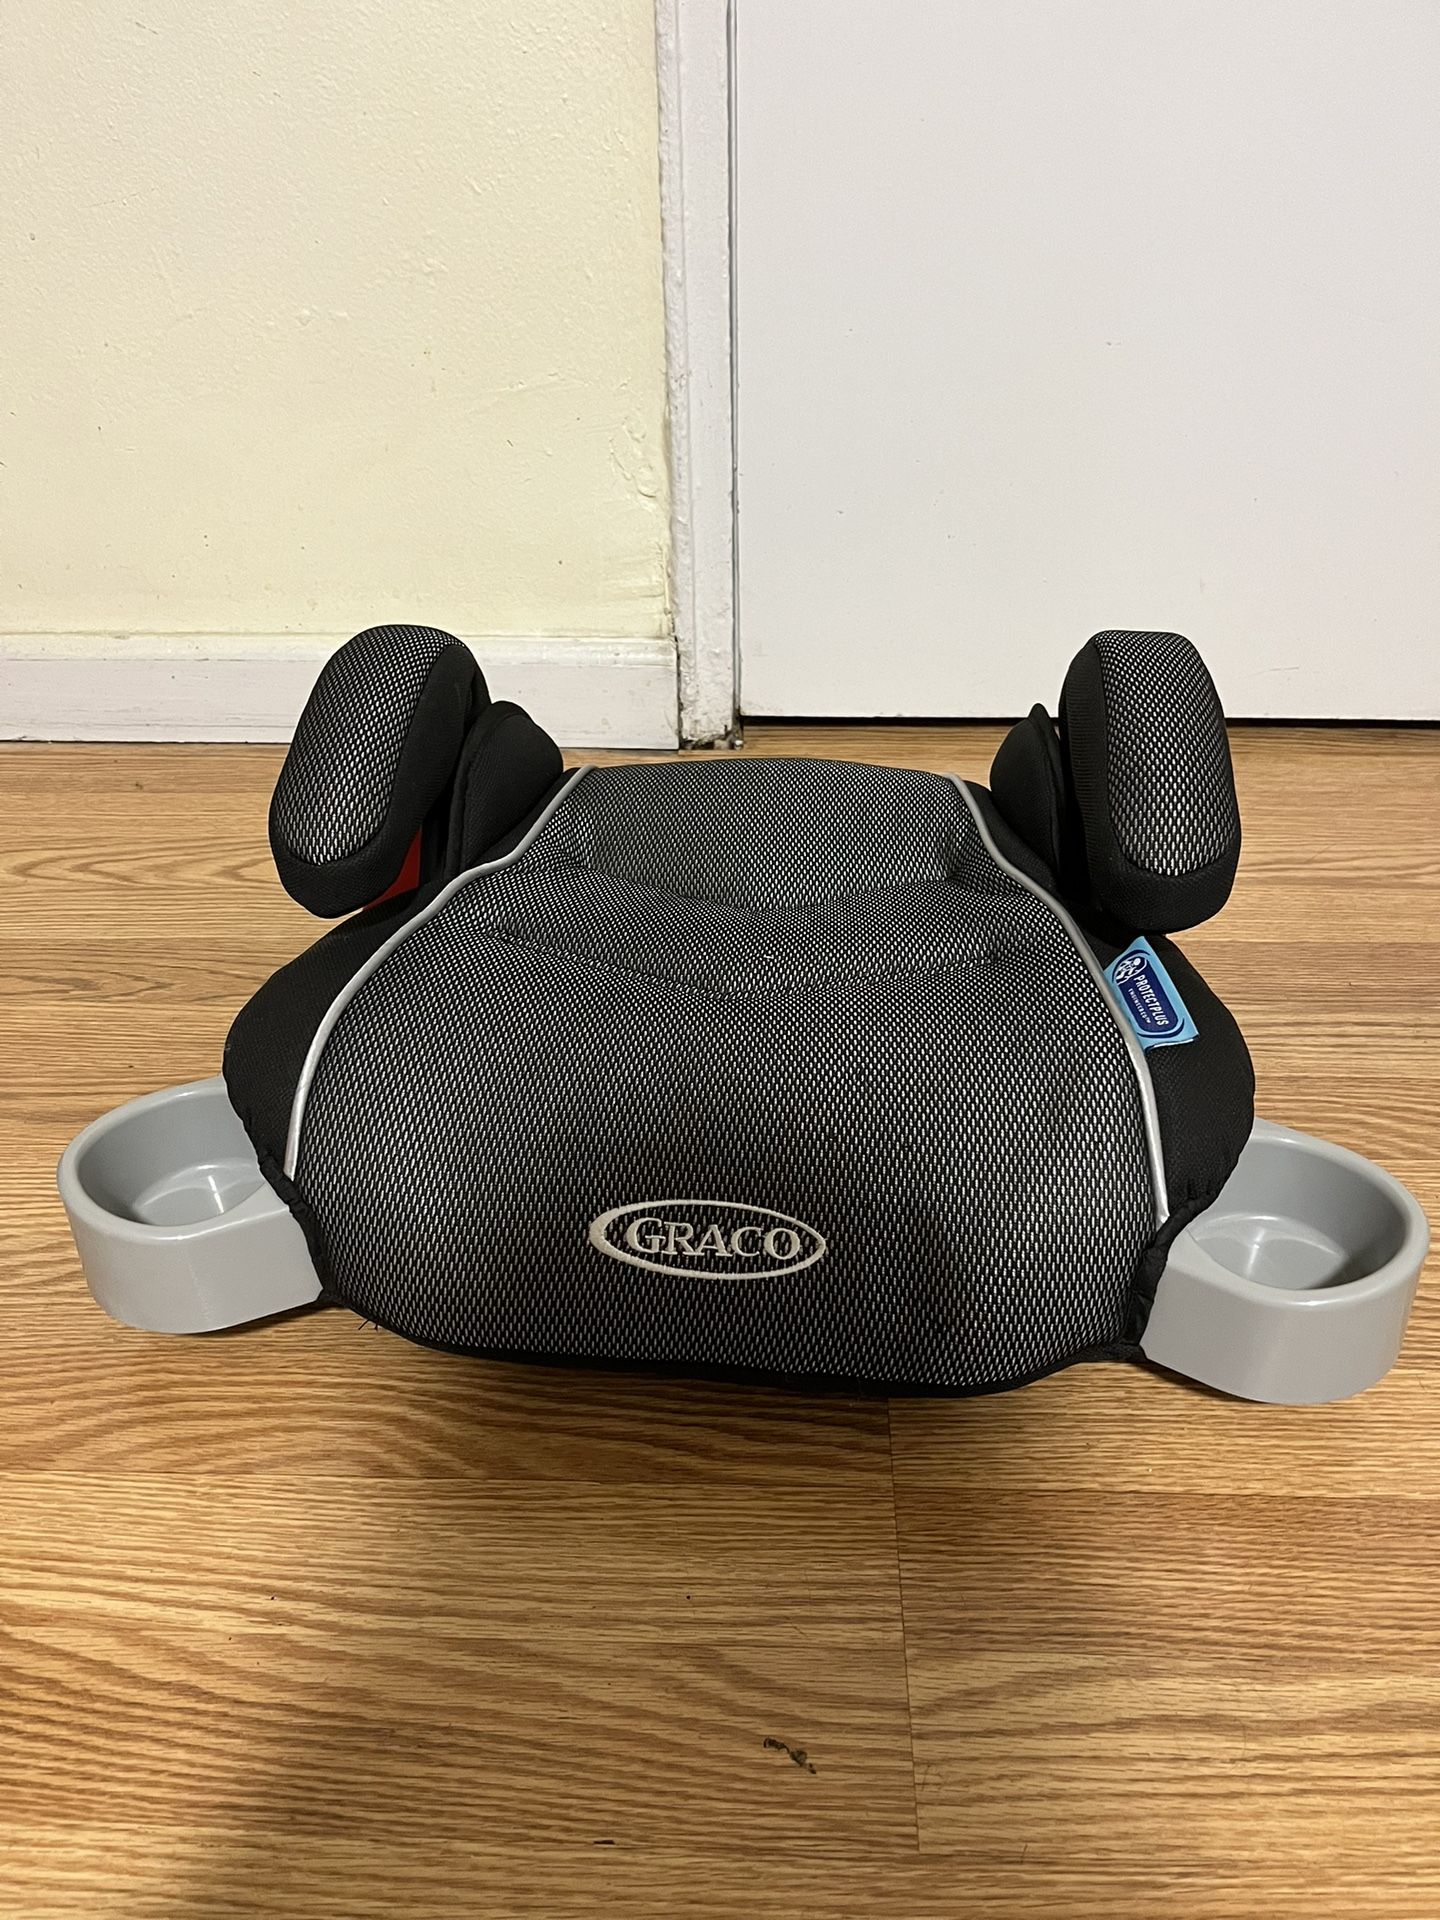 Graco Booster Car Seat With Carrying bag